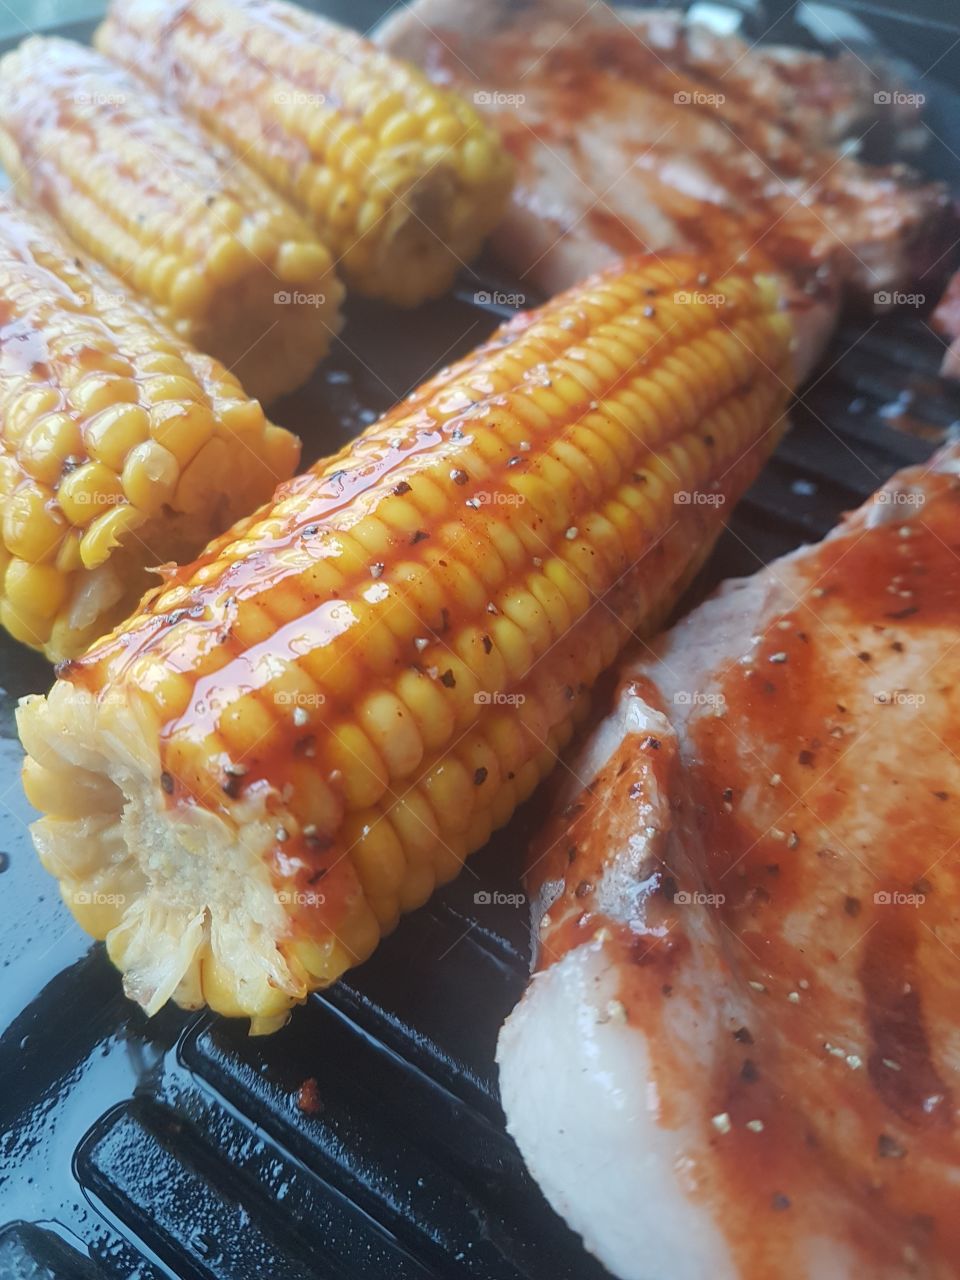 Corn for barbeque 🌽